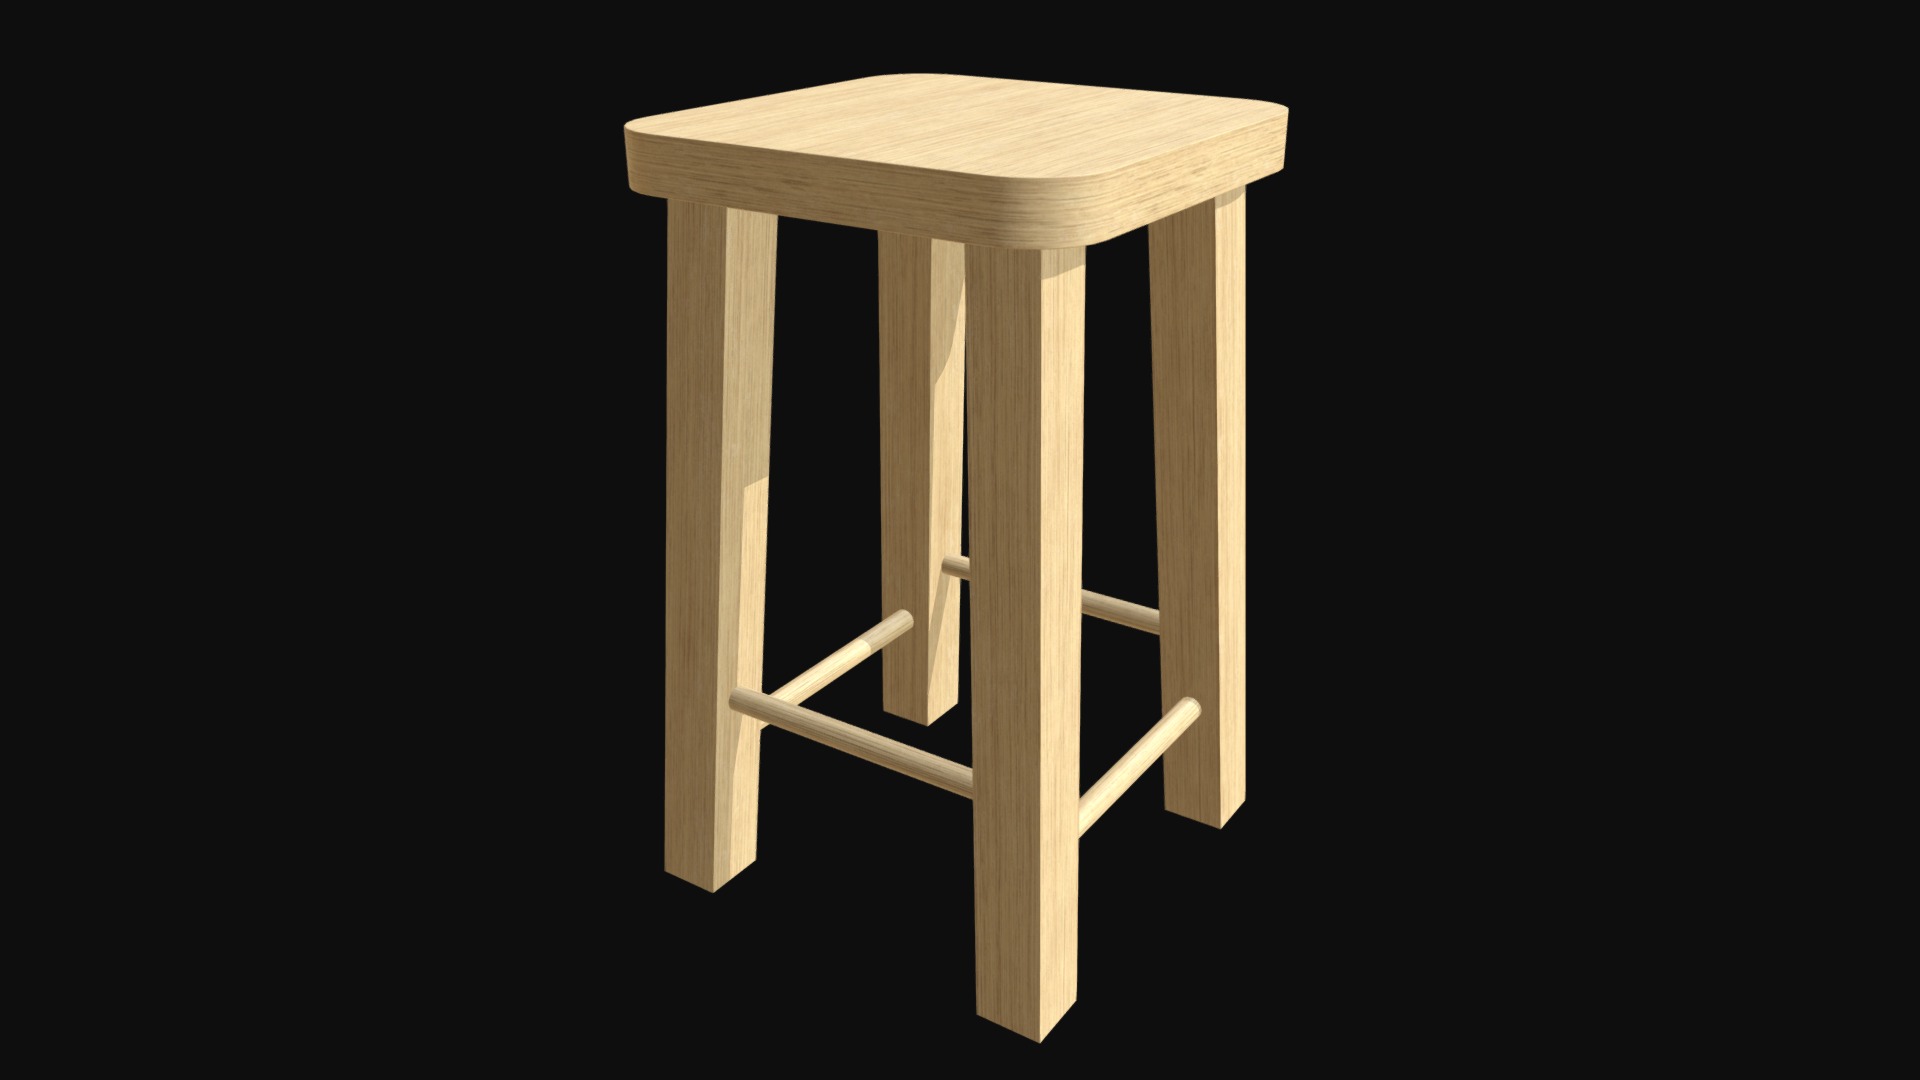 3D model Wooden stool - This is a 3D model of the Wooden stool. The 3D model is about a wooden chair with a black background.